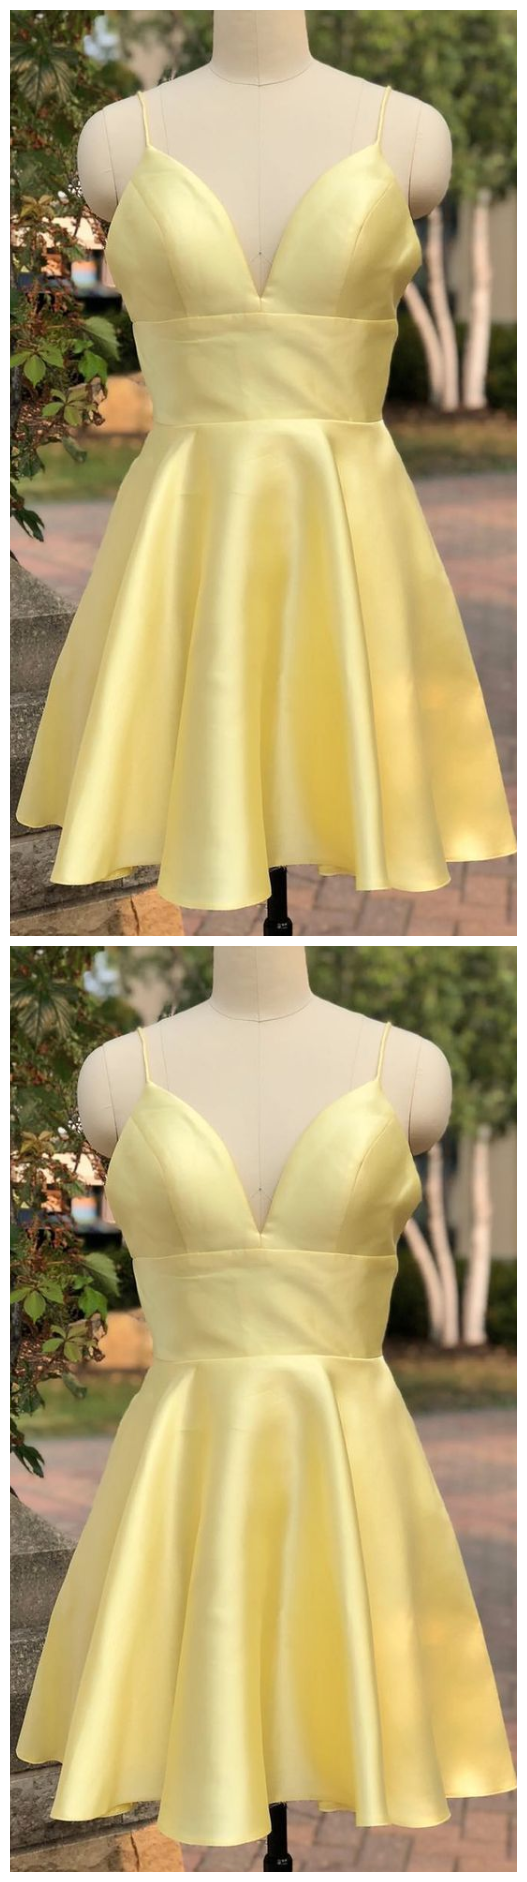 Homecoming Dresses Chelsea Light Yellow Cute Short Party Dress CD964